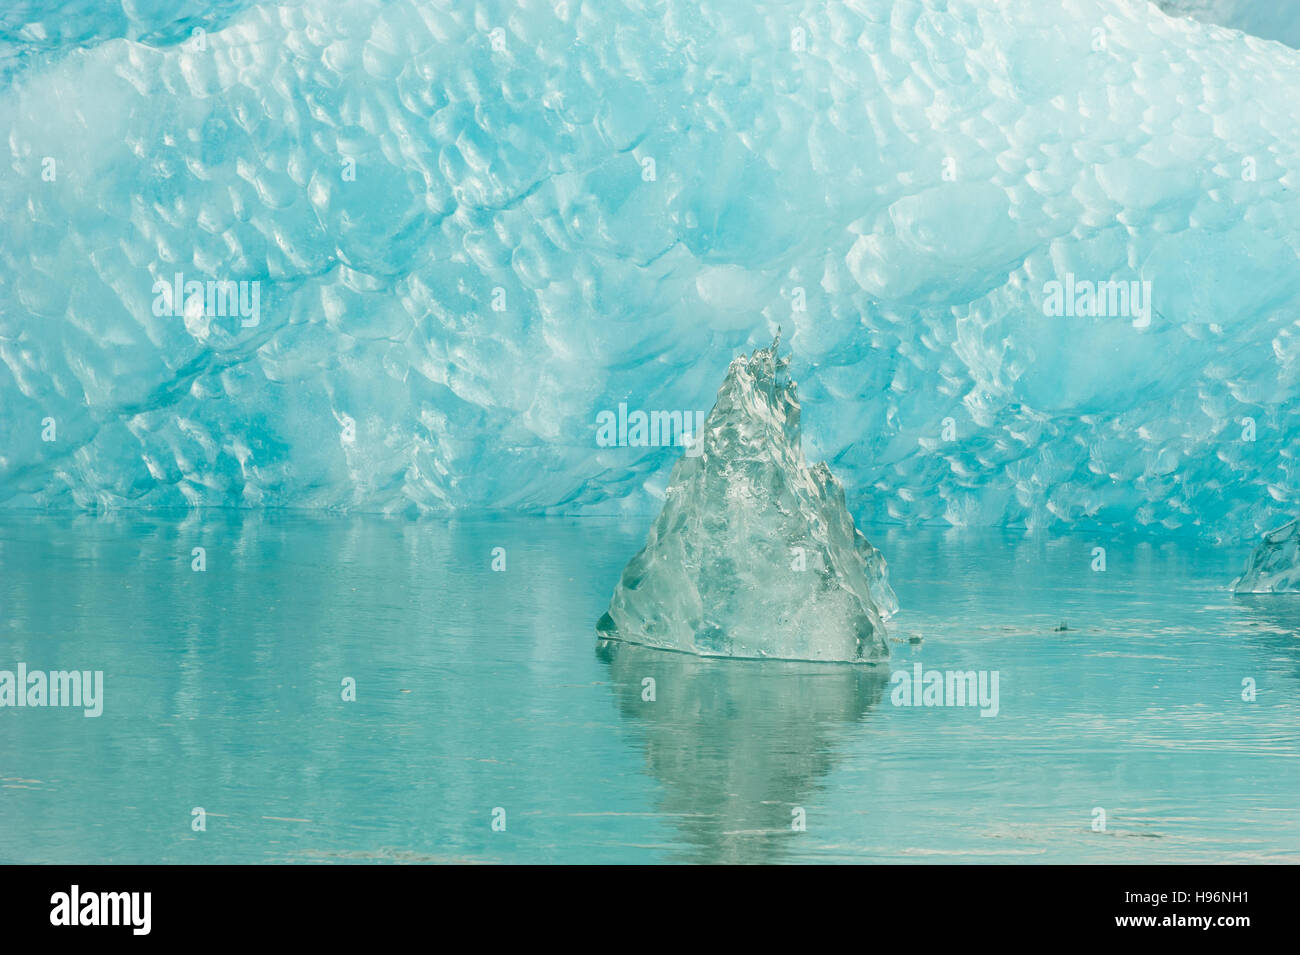 Climate change impact, an ice block surrounded by clear ice in flowing water Stock Photo